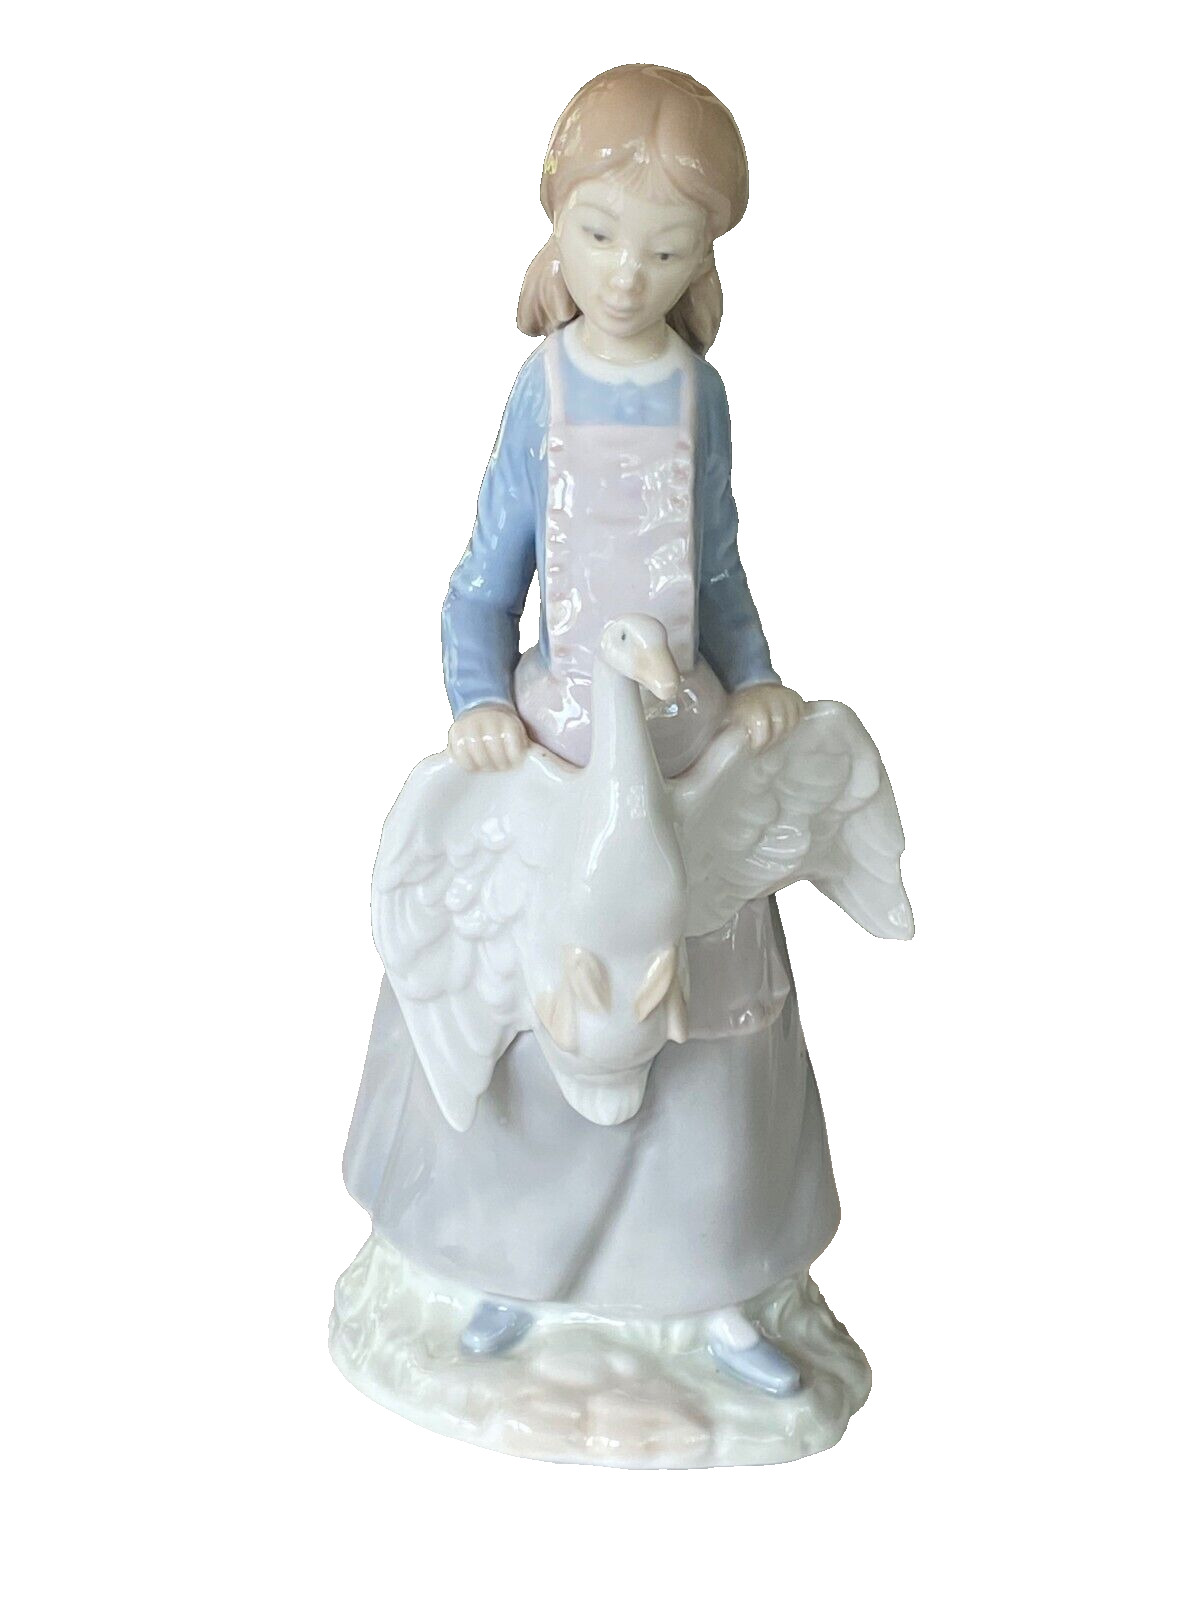 Nao Lladro Porcelain Figurine Goose Girl Made in Spain